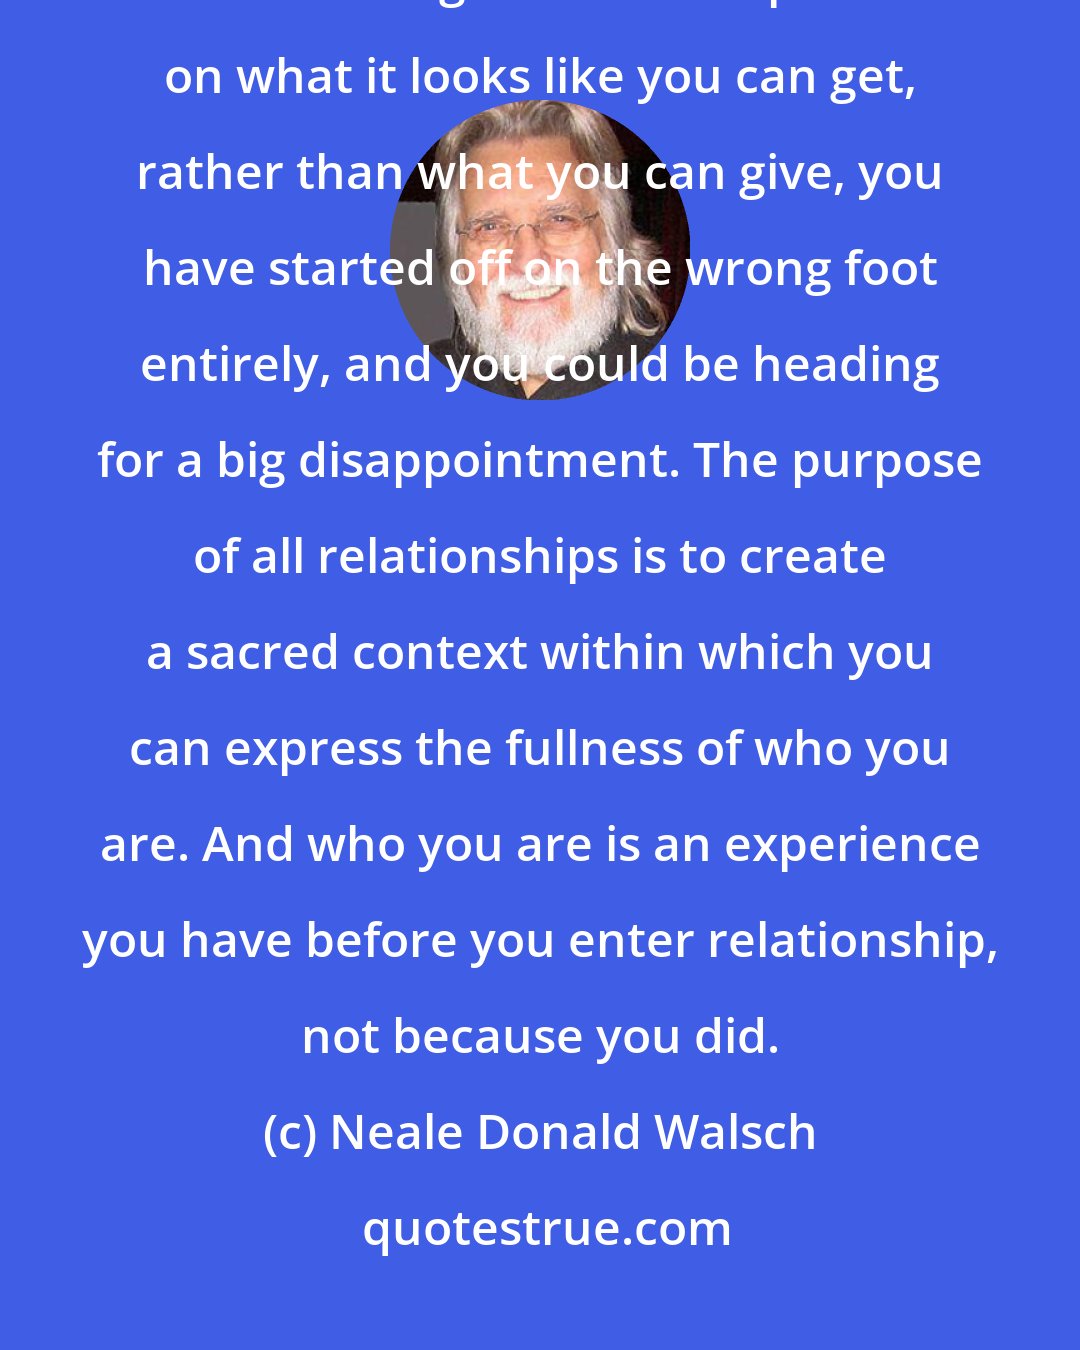 Neale Donald Walsch: The purpose of relationship may not be what you think. If you are excited about forming a relationship based on what it looks like you can get, rather than what you can give, you have started off on the wrong foot entirely, and you could be heading for a big disappointment. The purpose of all relationships is to create a sacred context within which you can express the fullness of who you are. And who you are is an experience you have before you enter relationship, not because you did.